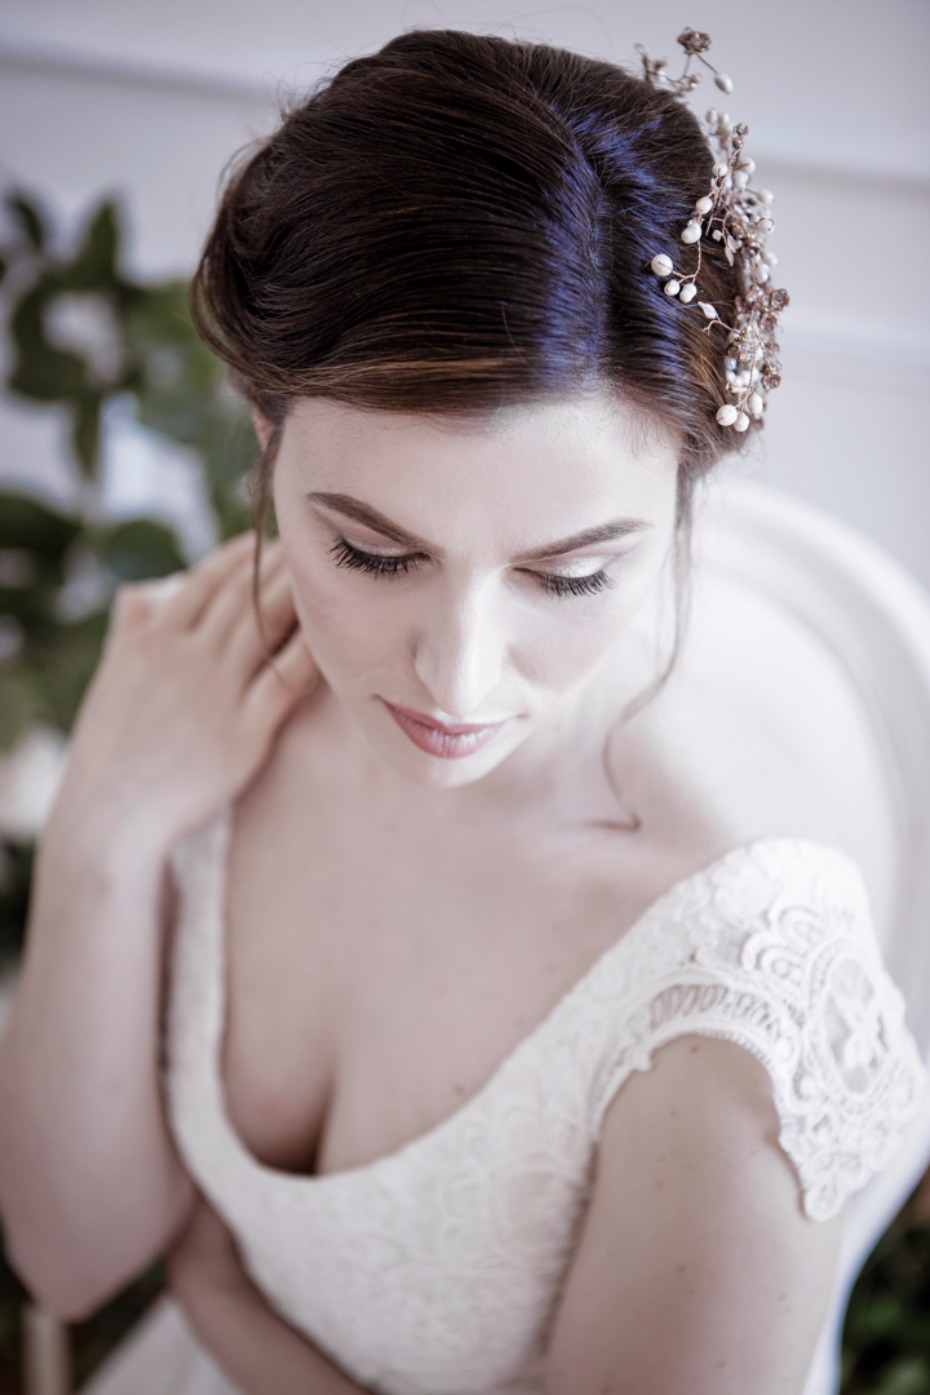 sweet and simple wedding style for your bridal look